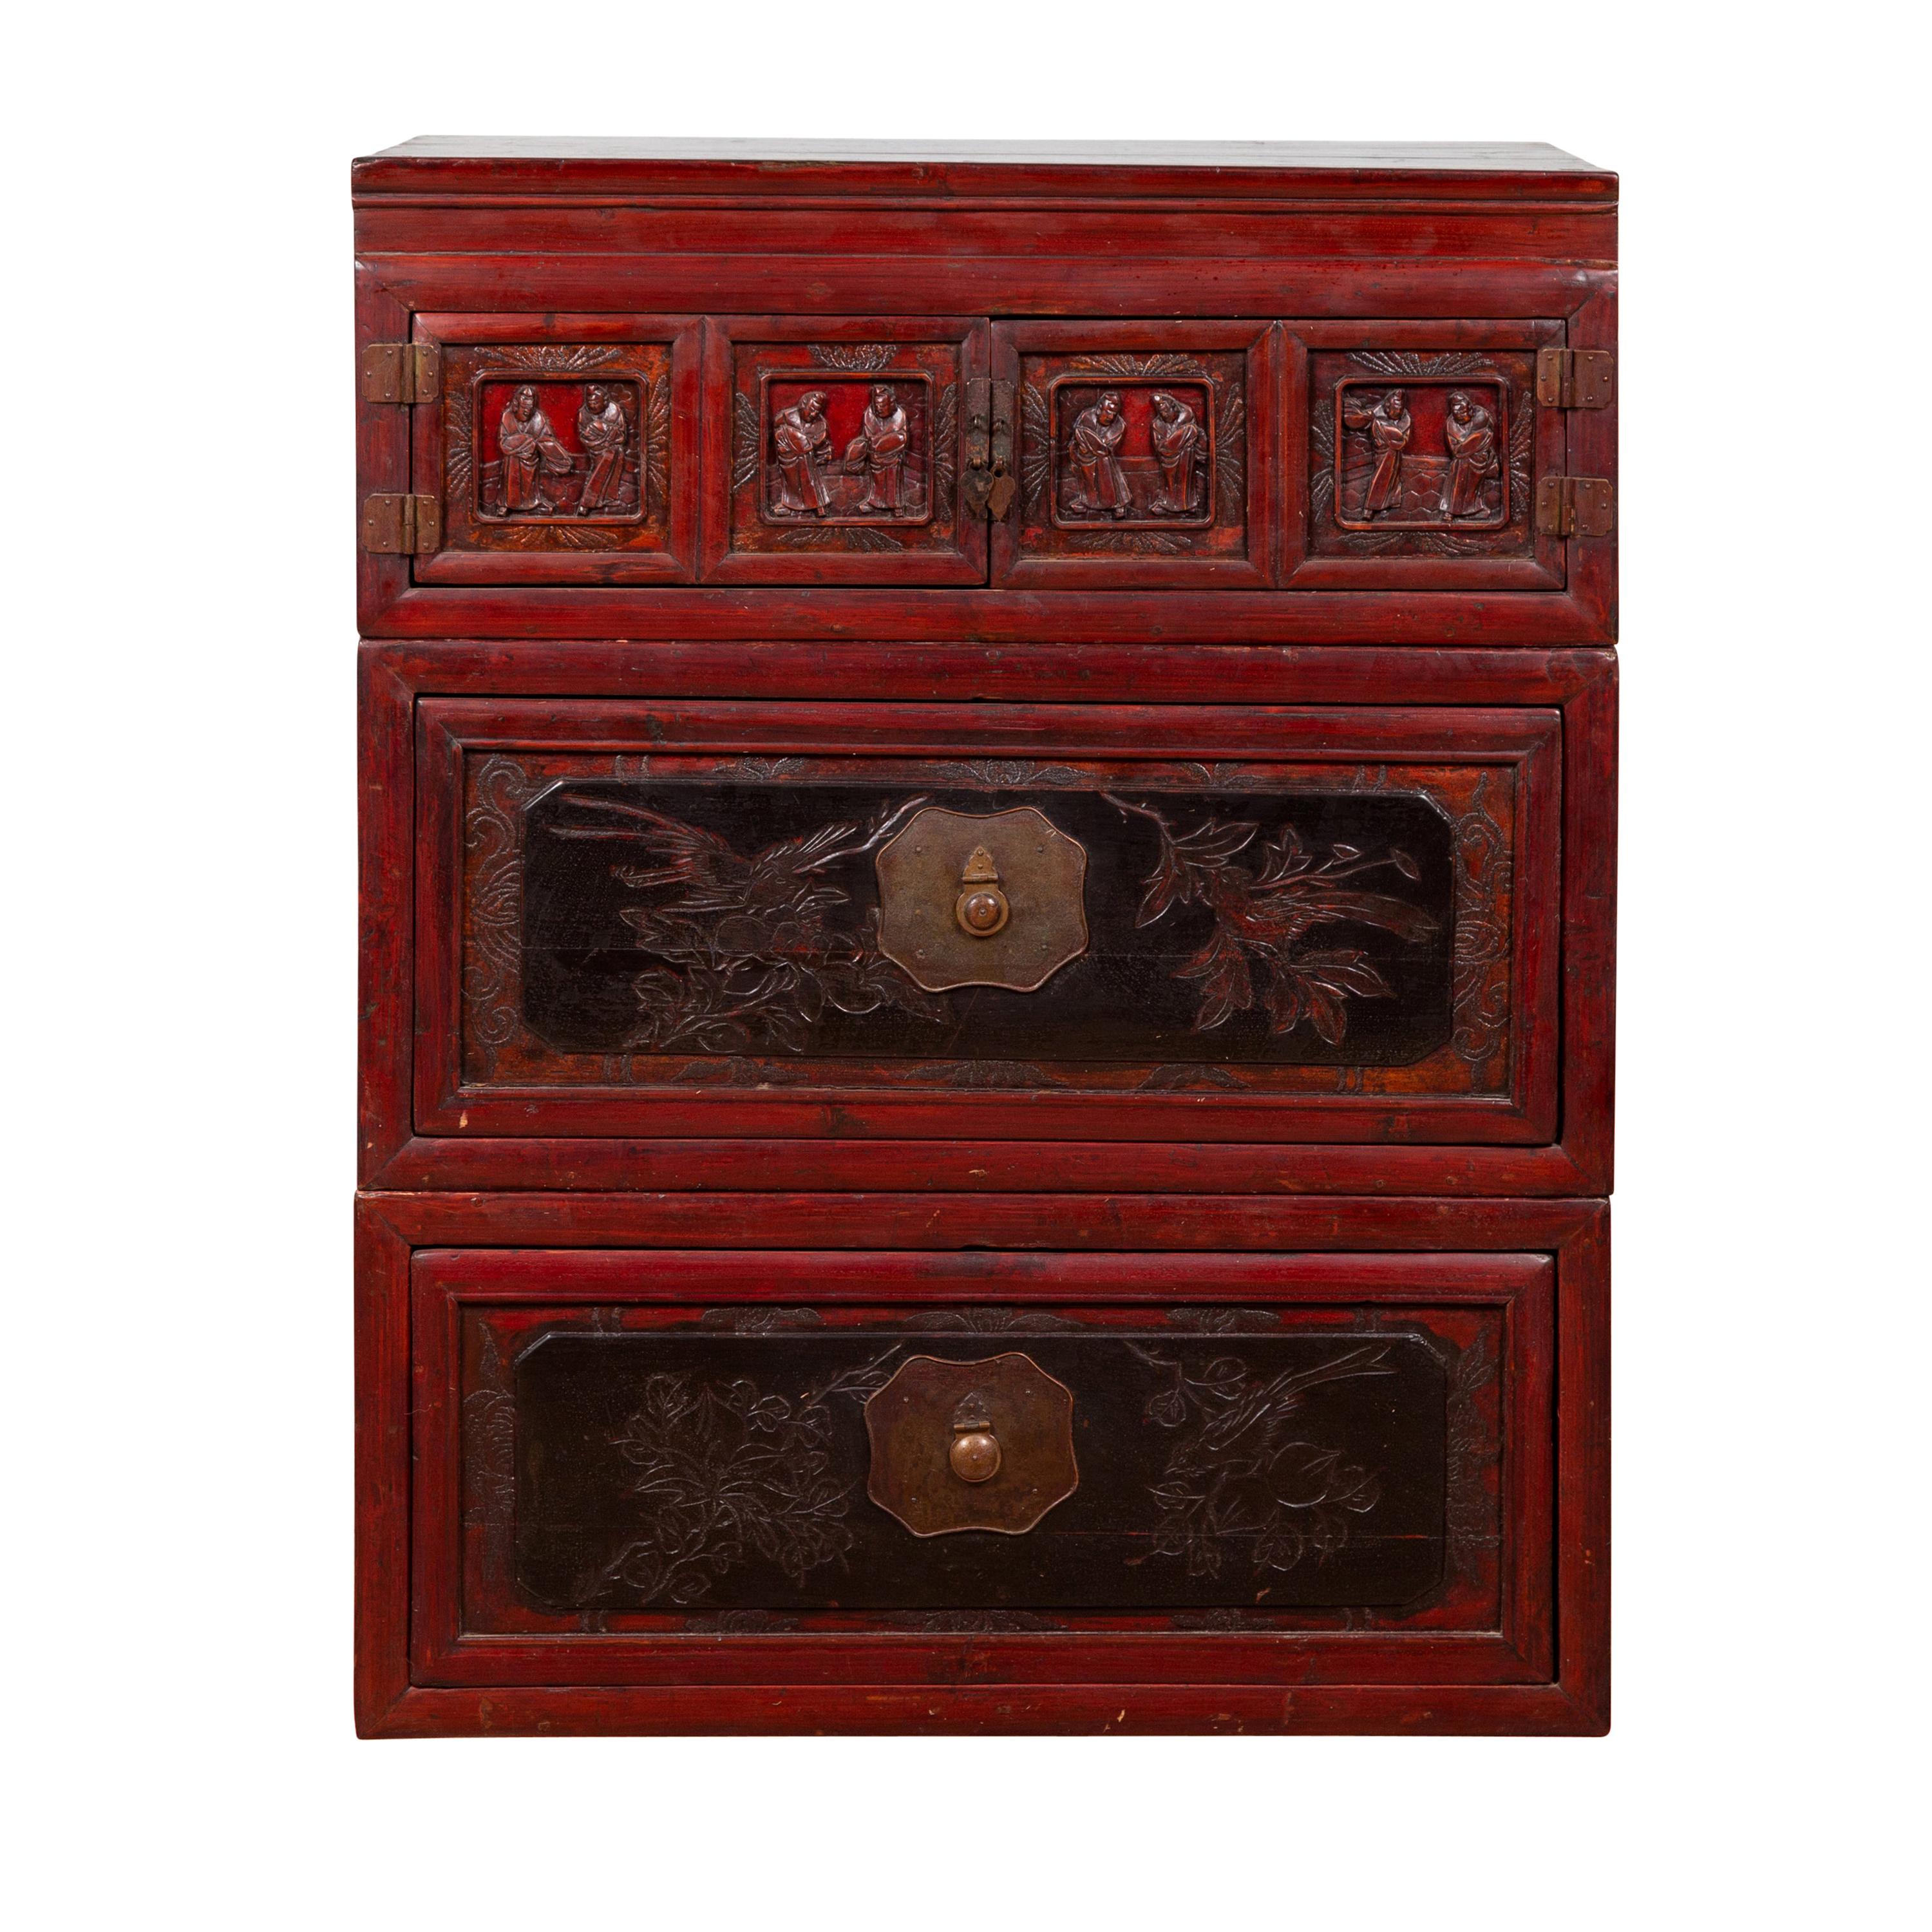 Antique Chinese Red and Black Lacquered Three-Section Chest with Carved Figures